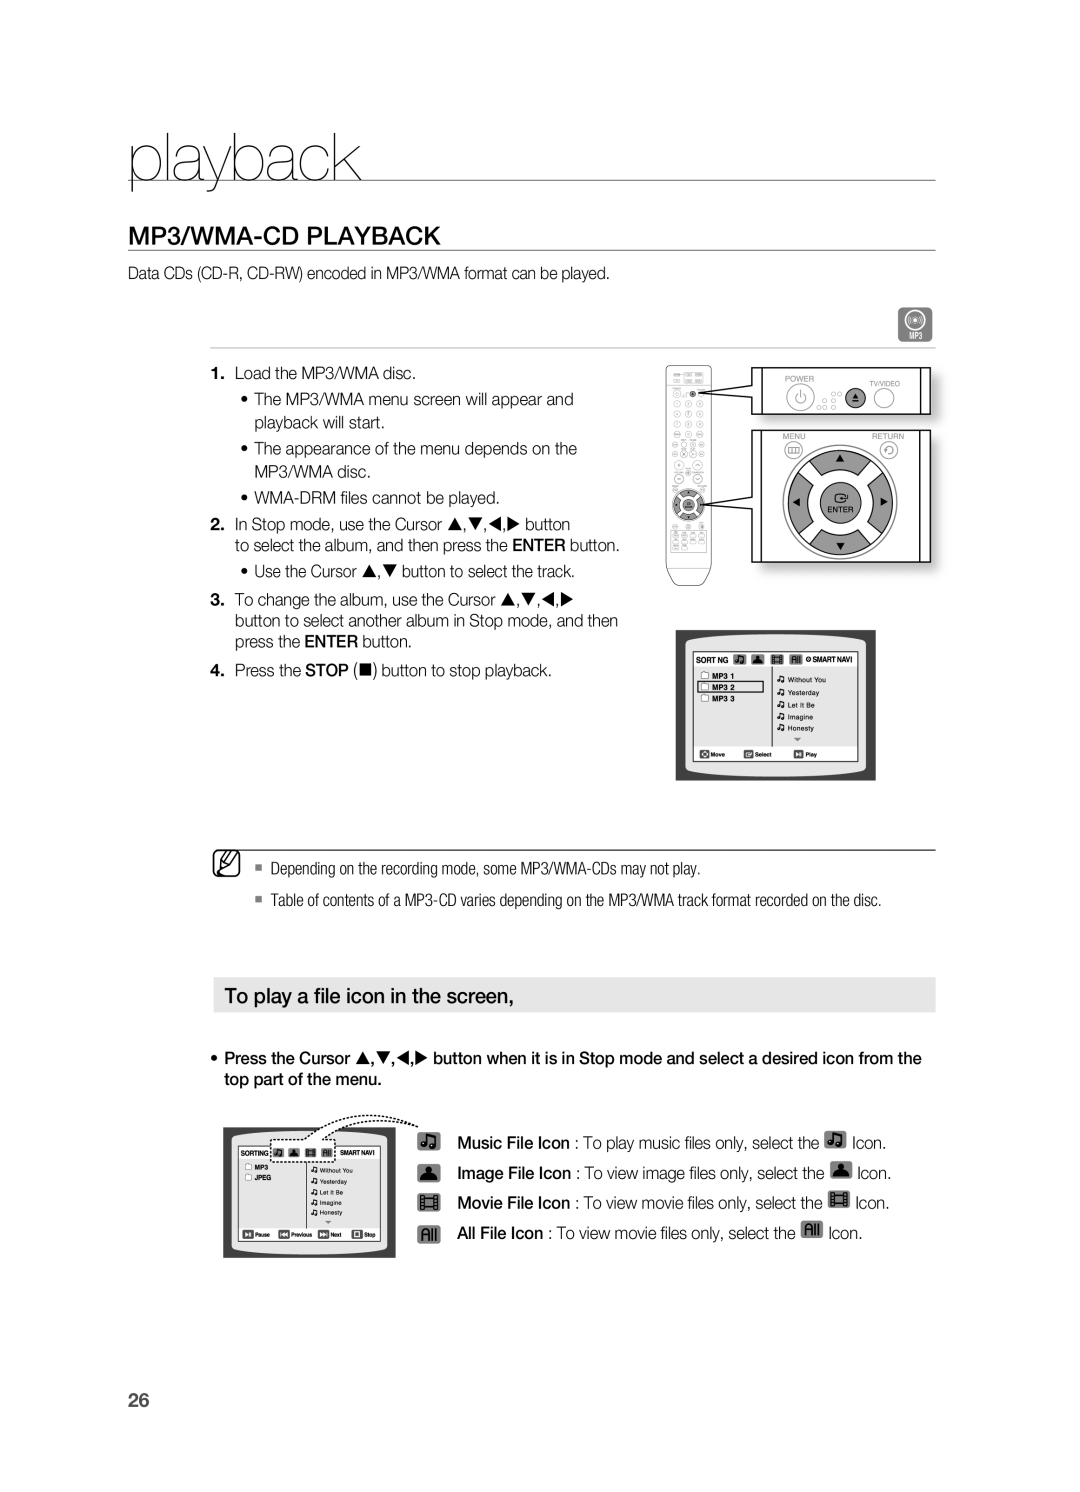 Samsung HT-A100 user manual MP3/WMA-CDPlAYBACK, playback, To play a file icon in the screen 